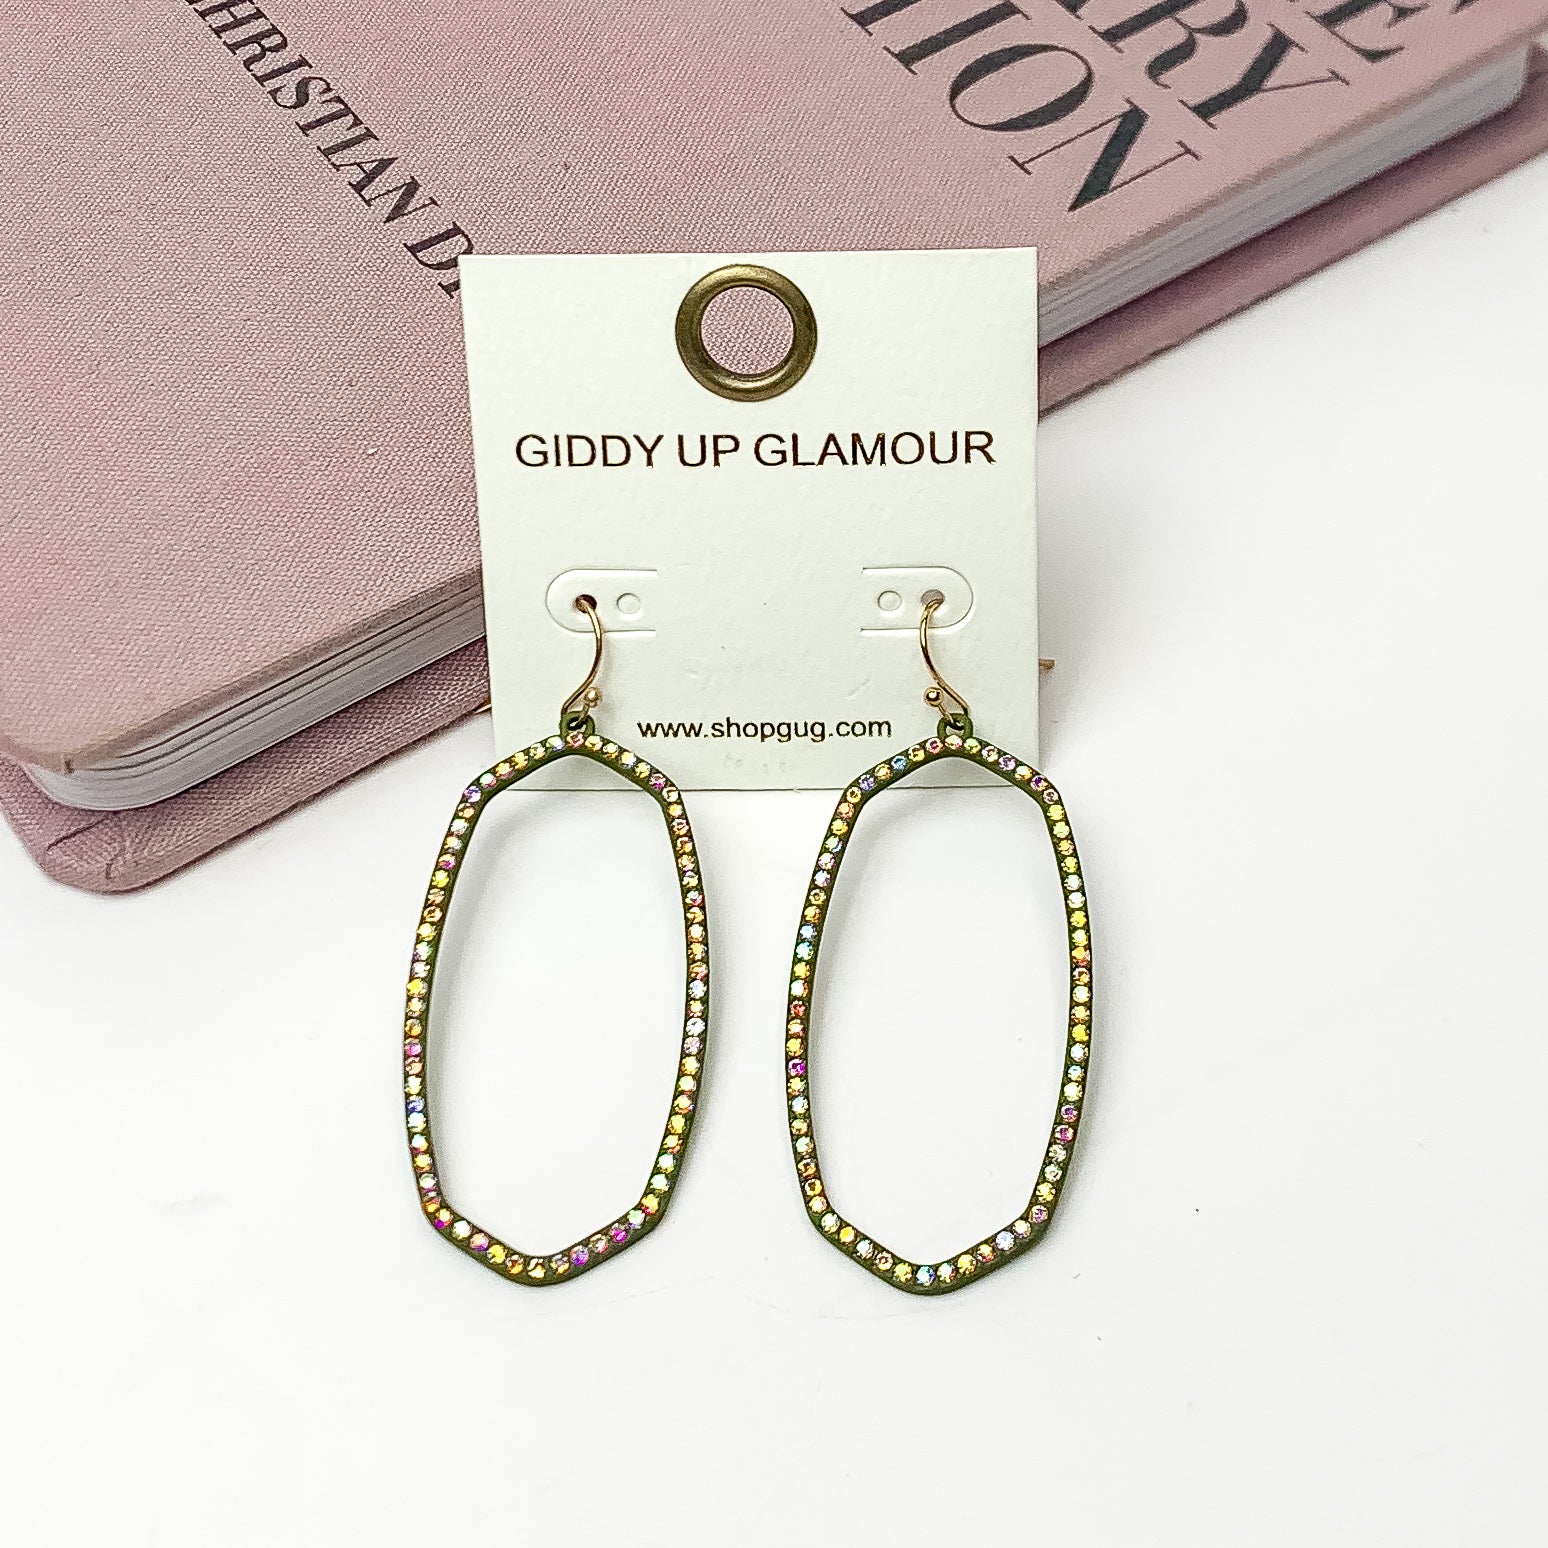 Sparkle Girl Open Oval Earrings in Olive Green. These earrings are pictured laying against a pink book with a white background.